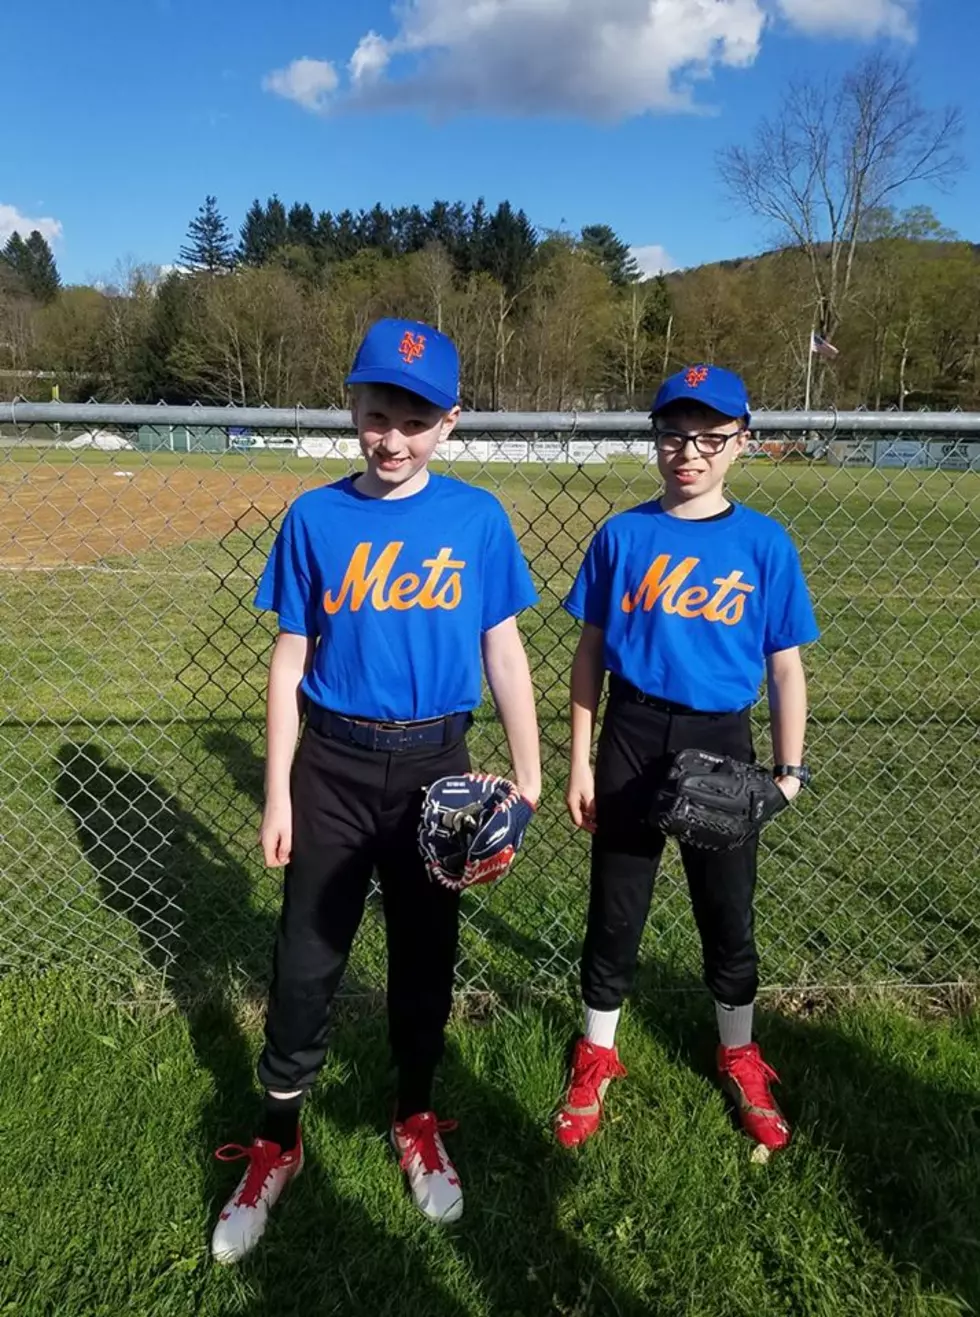 Missing Baseball? Check Out the Southern Tier’s Little Leaguers [PICS]